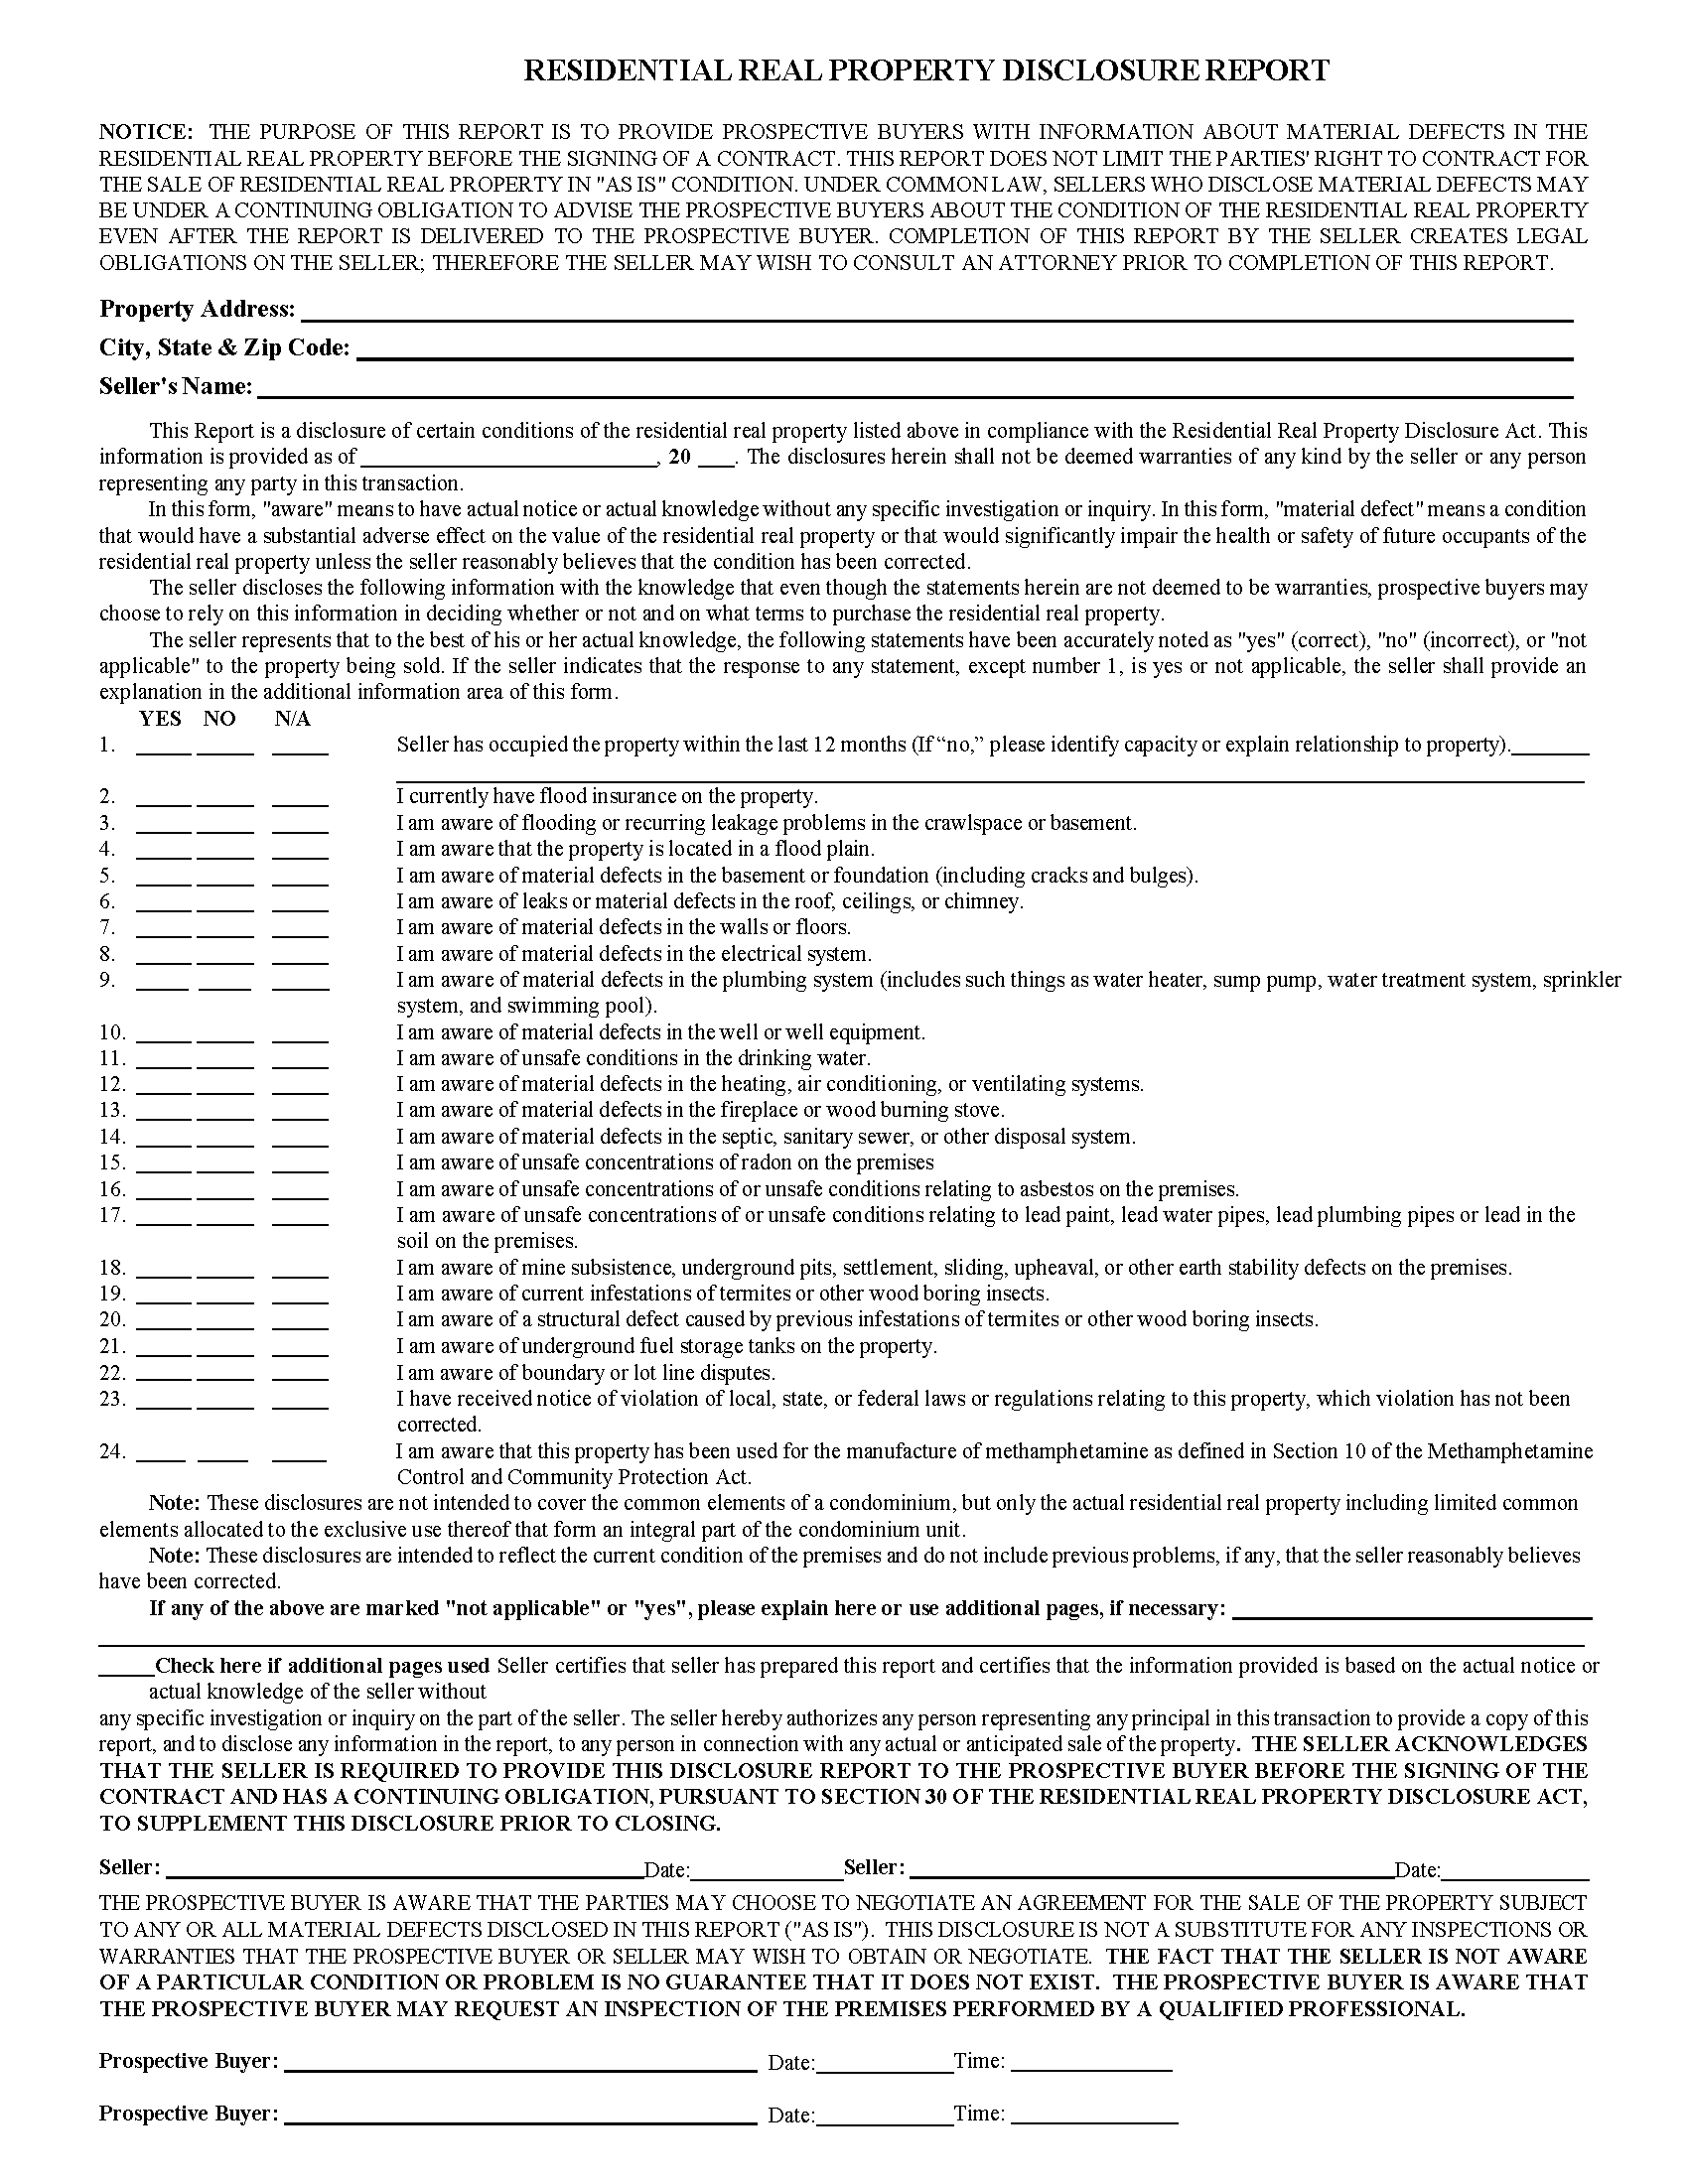 Jackson County Real Property Disclosure Form